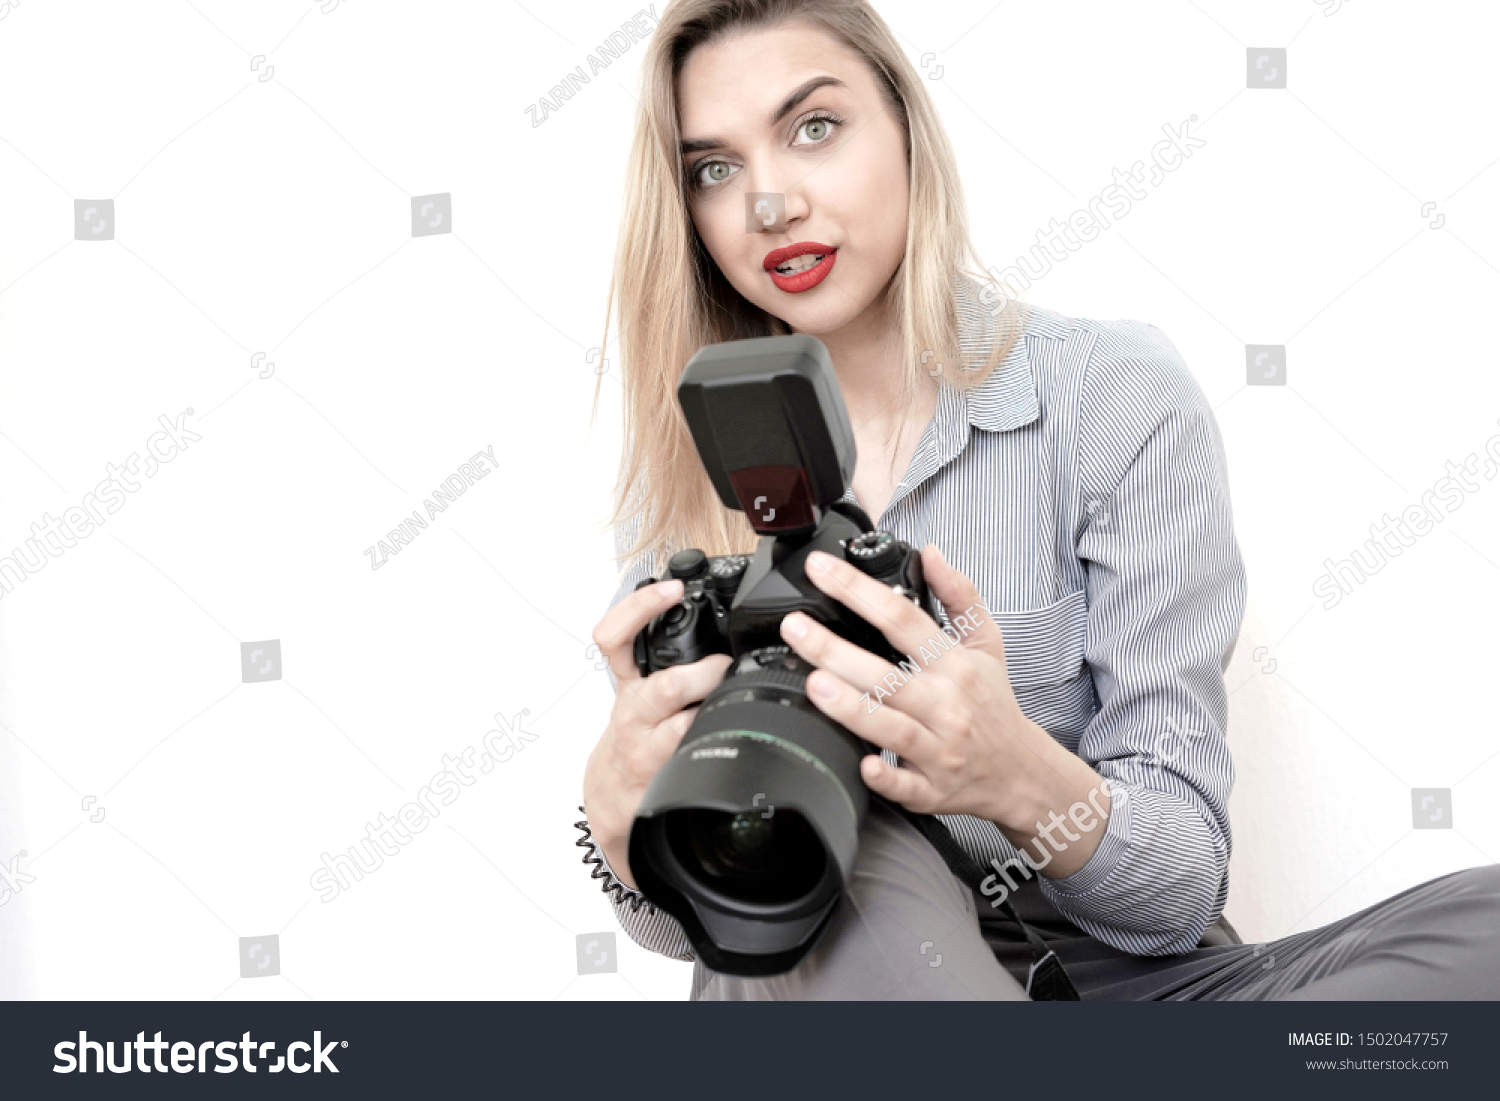 Beautiful girl journalist with a big camera in hands on a white background #1502047757